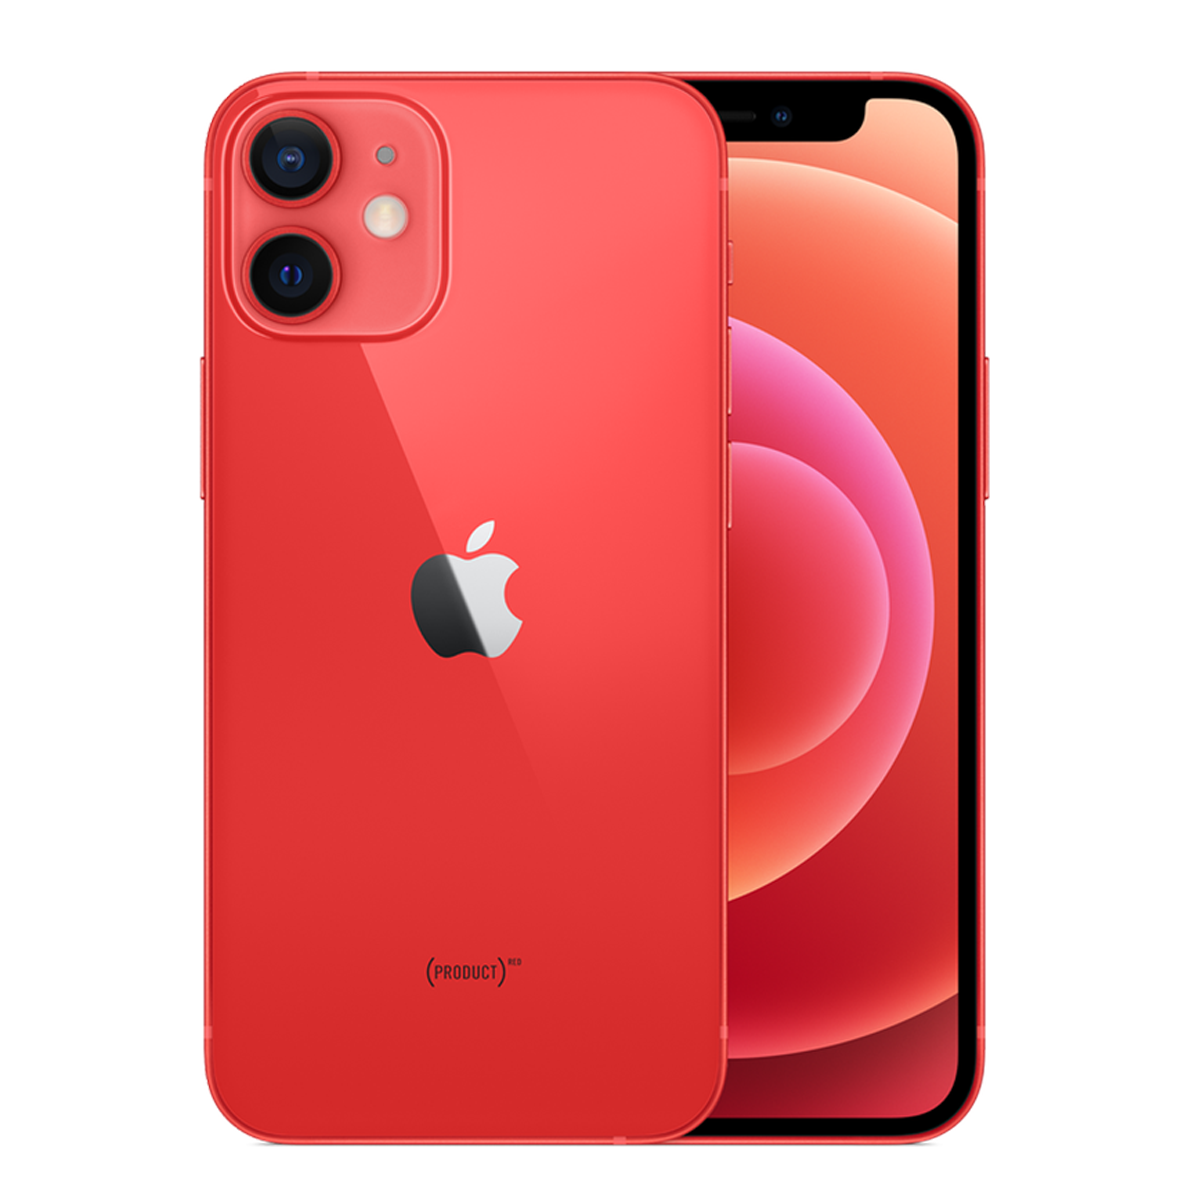 iPhone 12 mini, (PRODUCT)Red, 256GB (Official Stock)